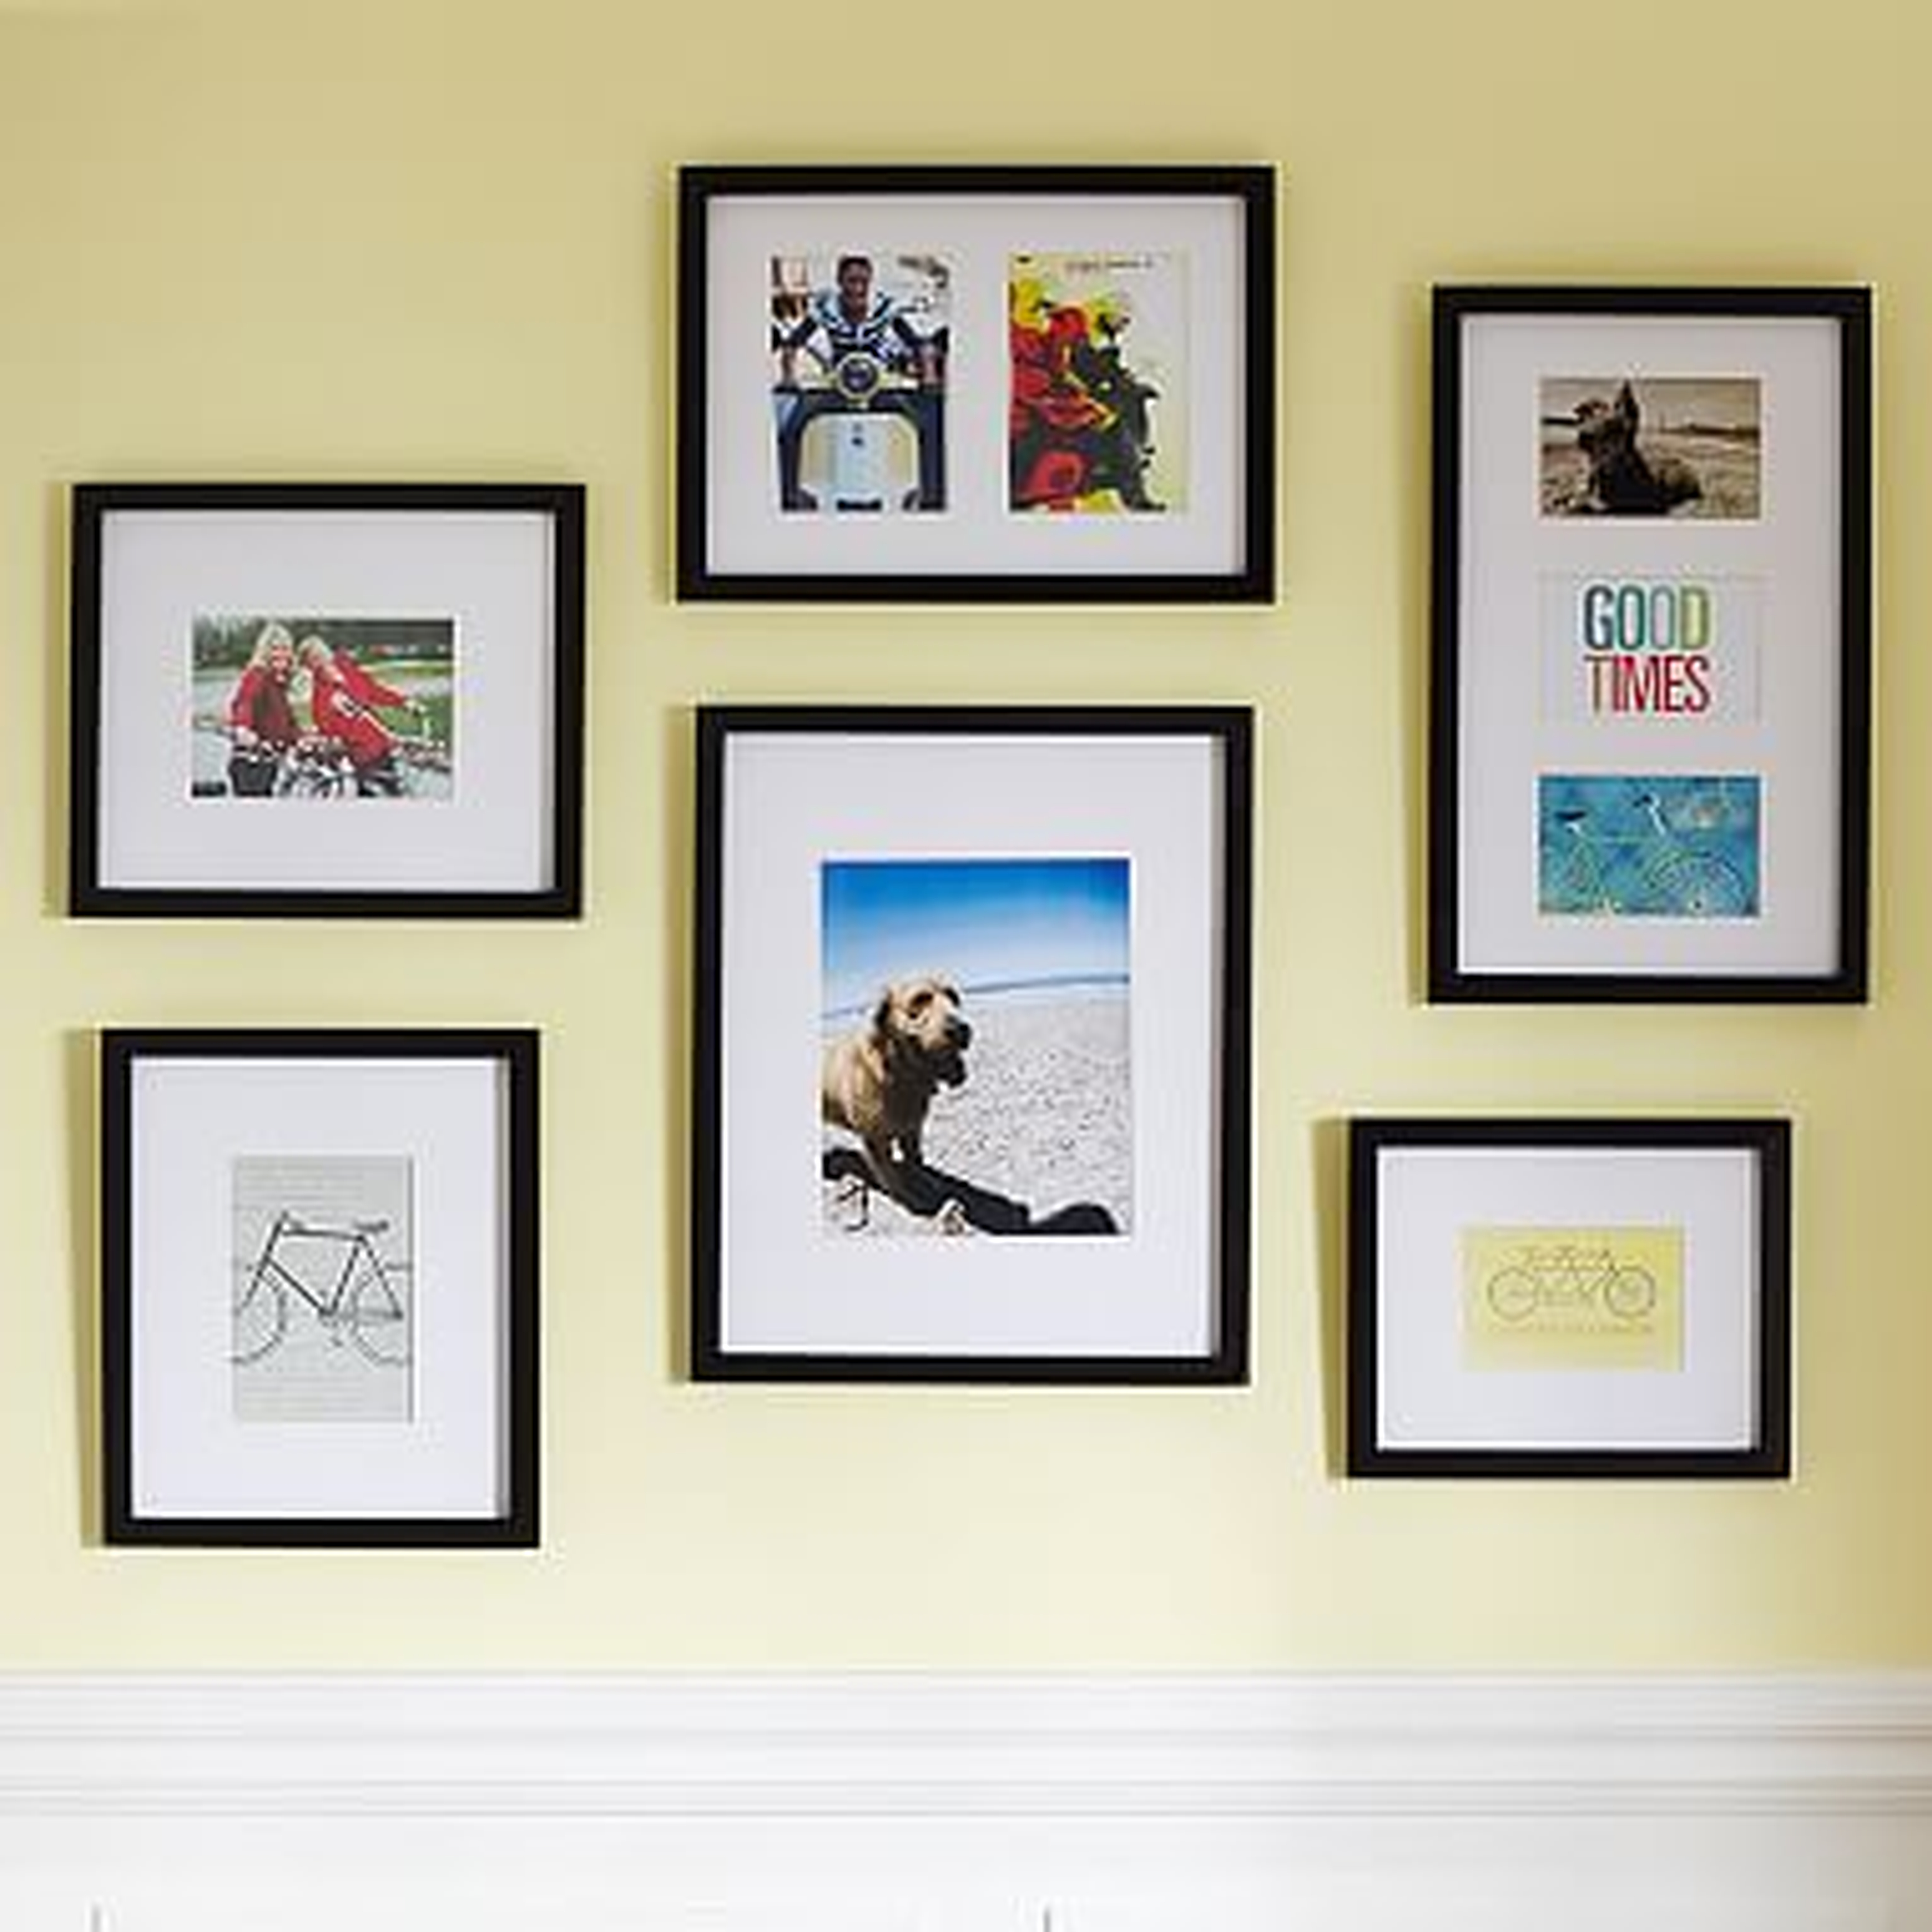 Gallery Frames, Gallery In A Box, Set of 6, Black - Pottery Barn Teen